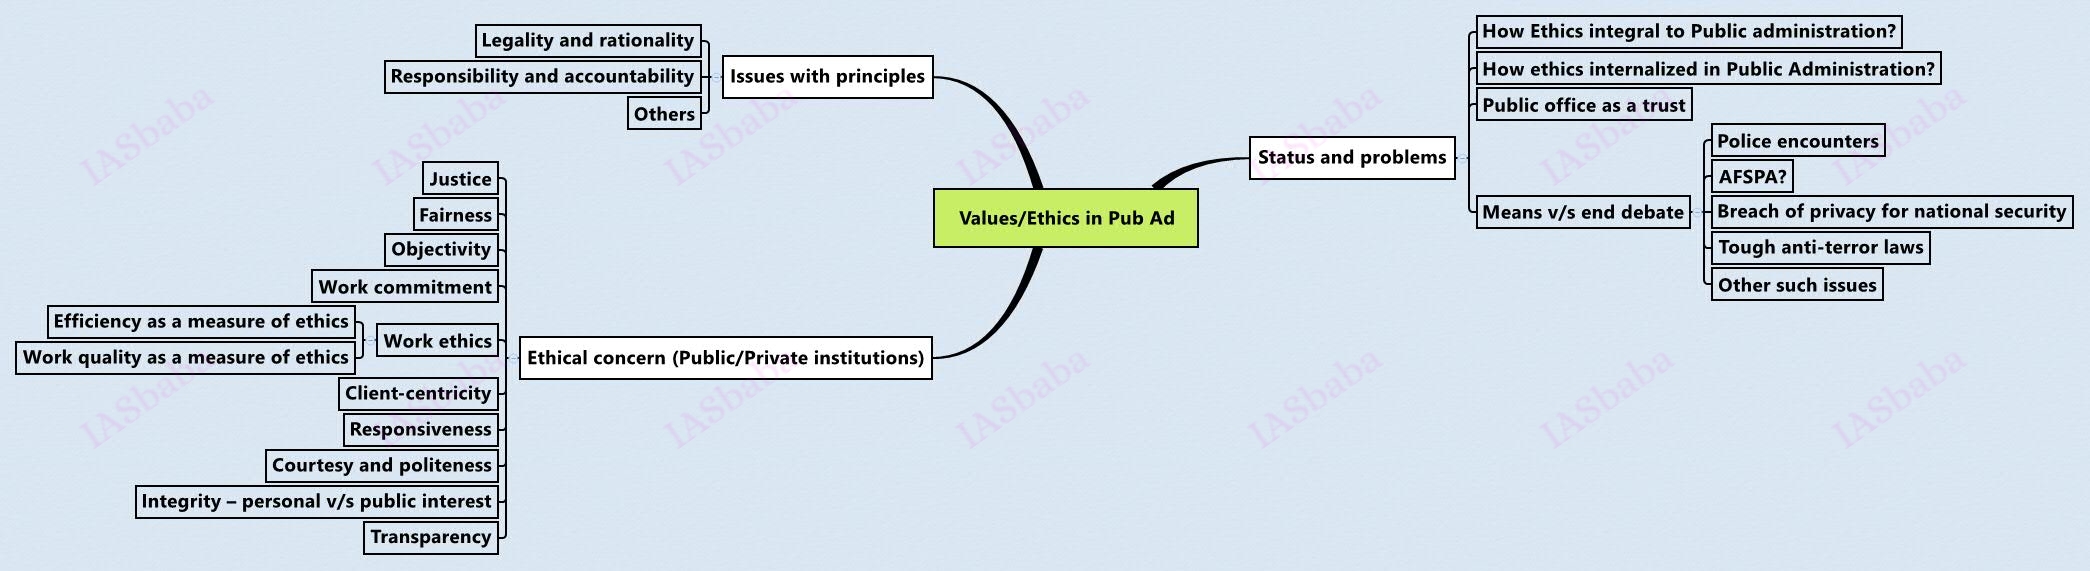 Ethics-in-Public Administration